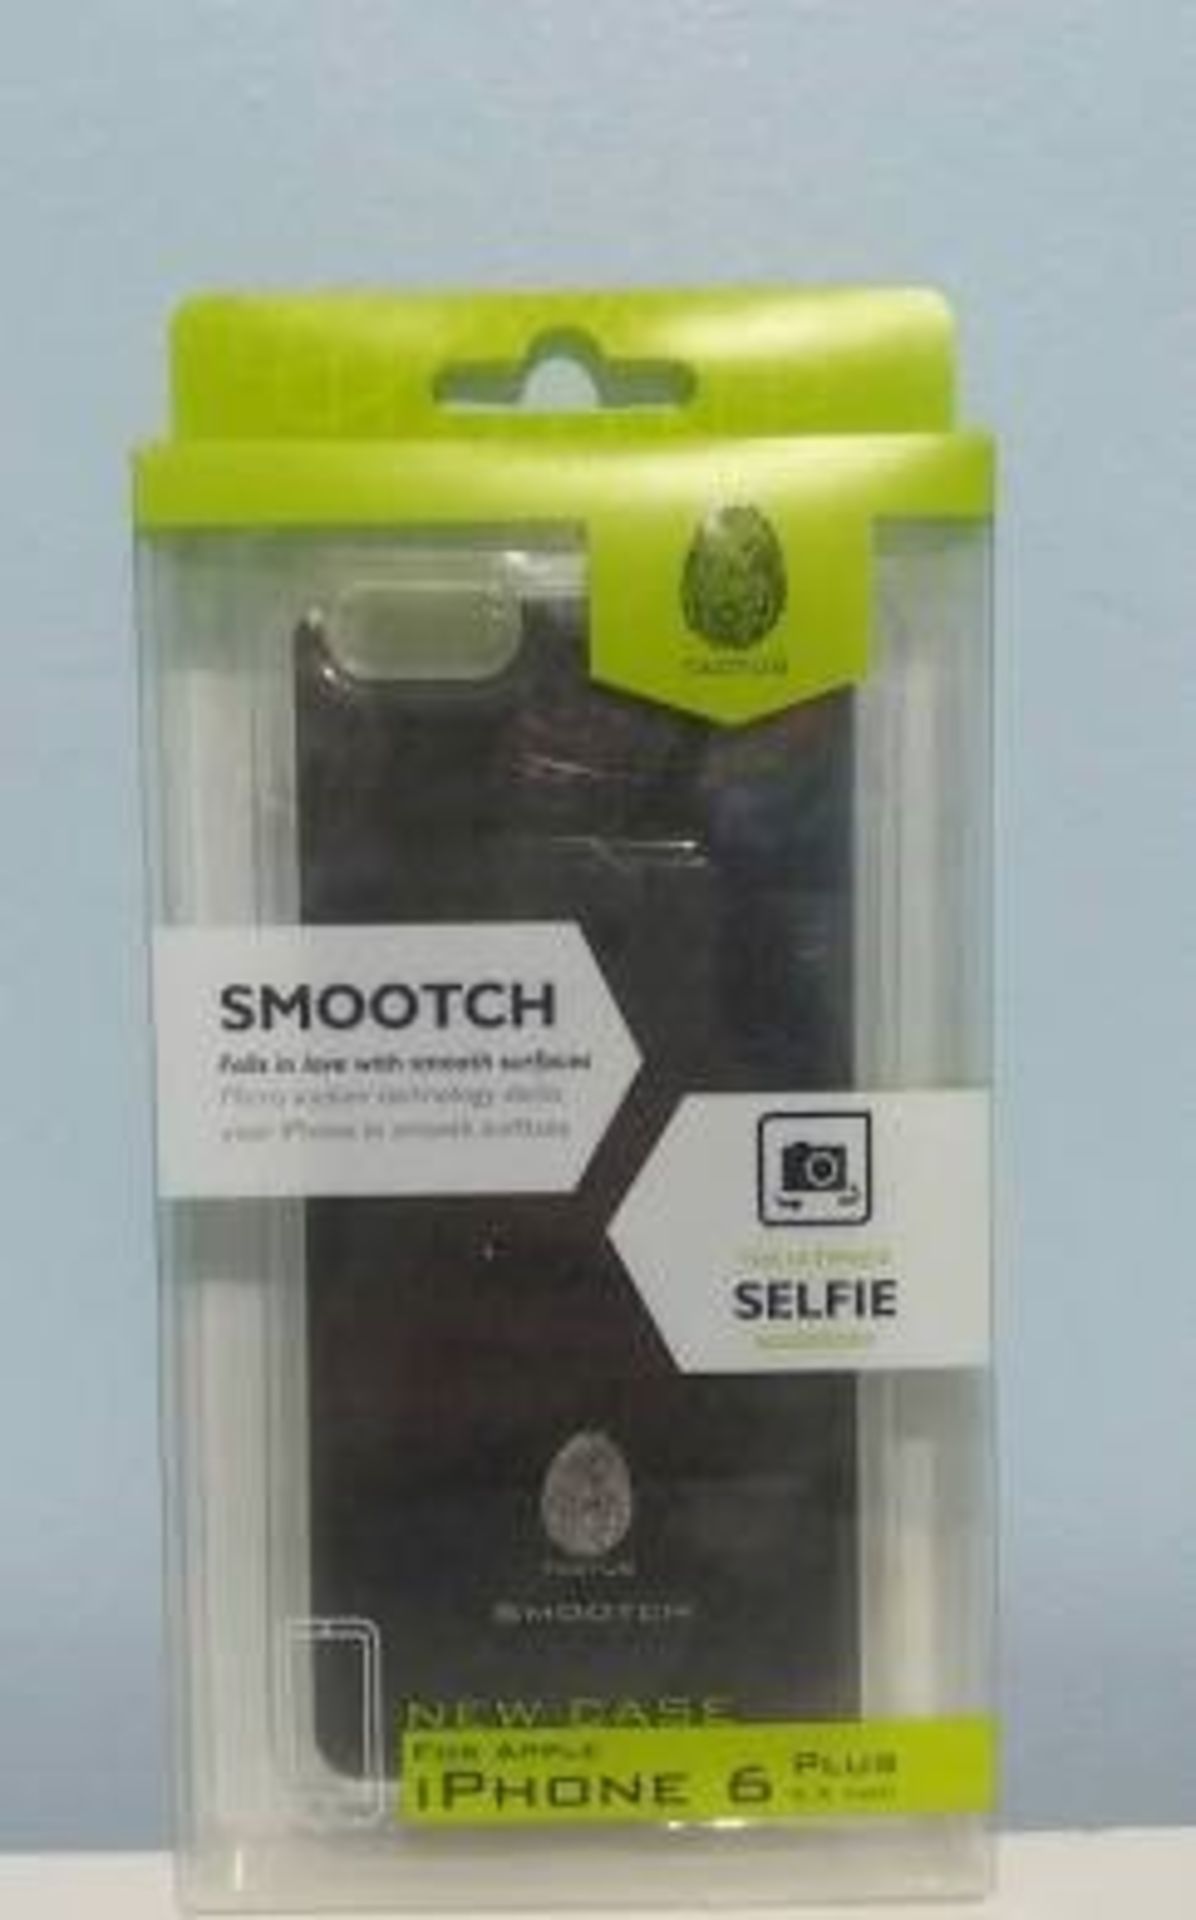 1 AS NEW BOXED TACTUS SMOOTCH SELFIE IPHONE 6 PLUS